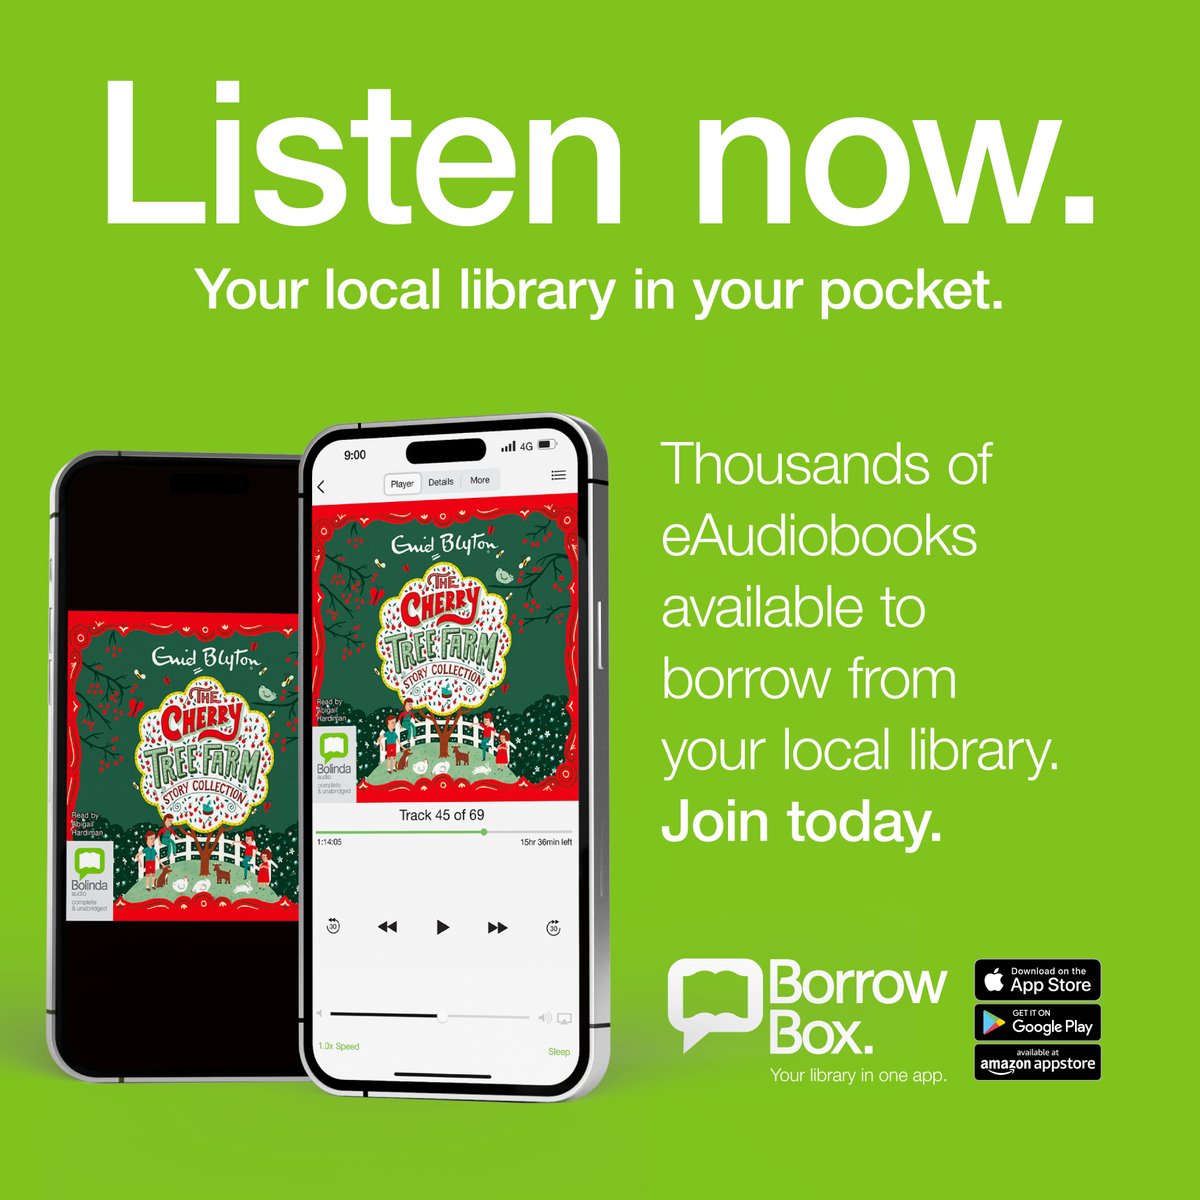 These #eaudiobooks are available to borrow now, with no waiting! Enjoy these and many more titles through the #BorrowBox library app.
northnorthants.gov.uk/eaudiobooks
westnorthants.gov.uk/eaudiobooks